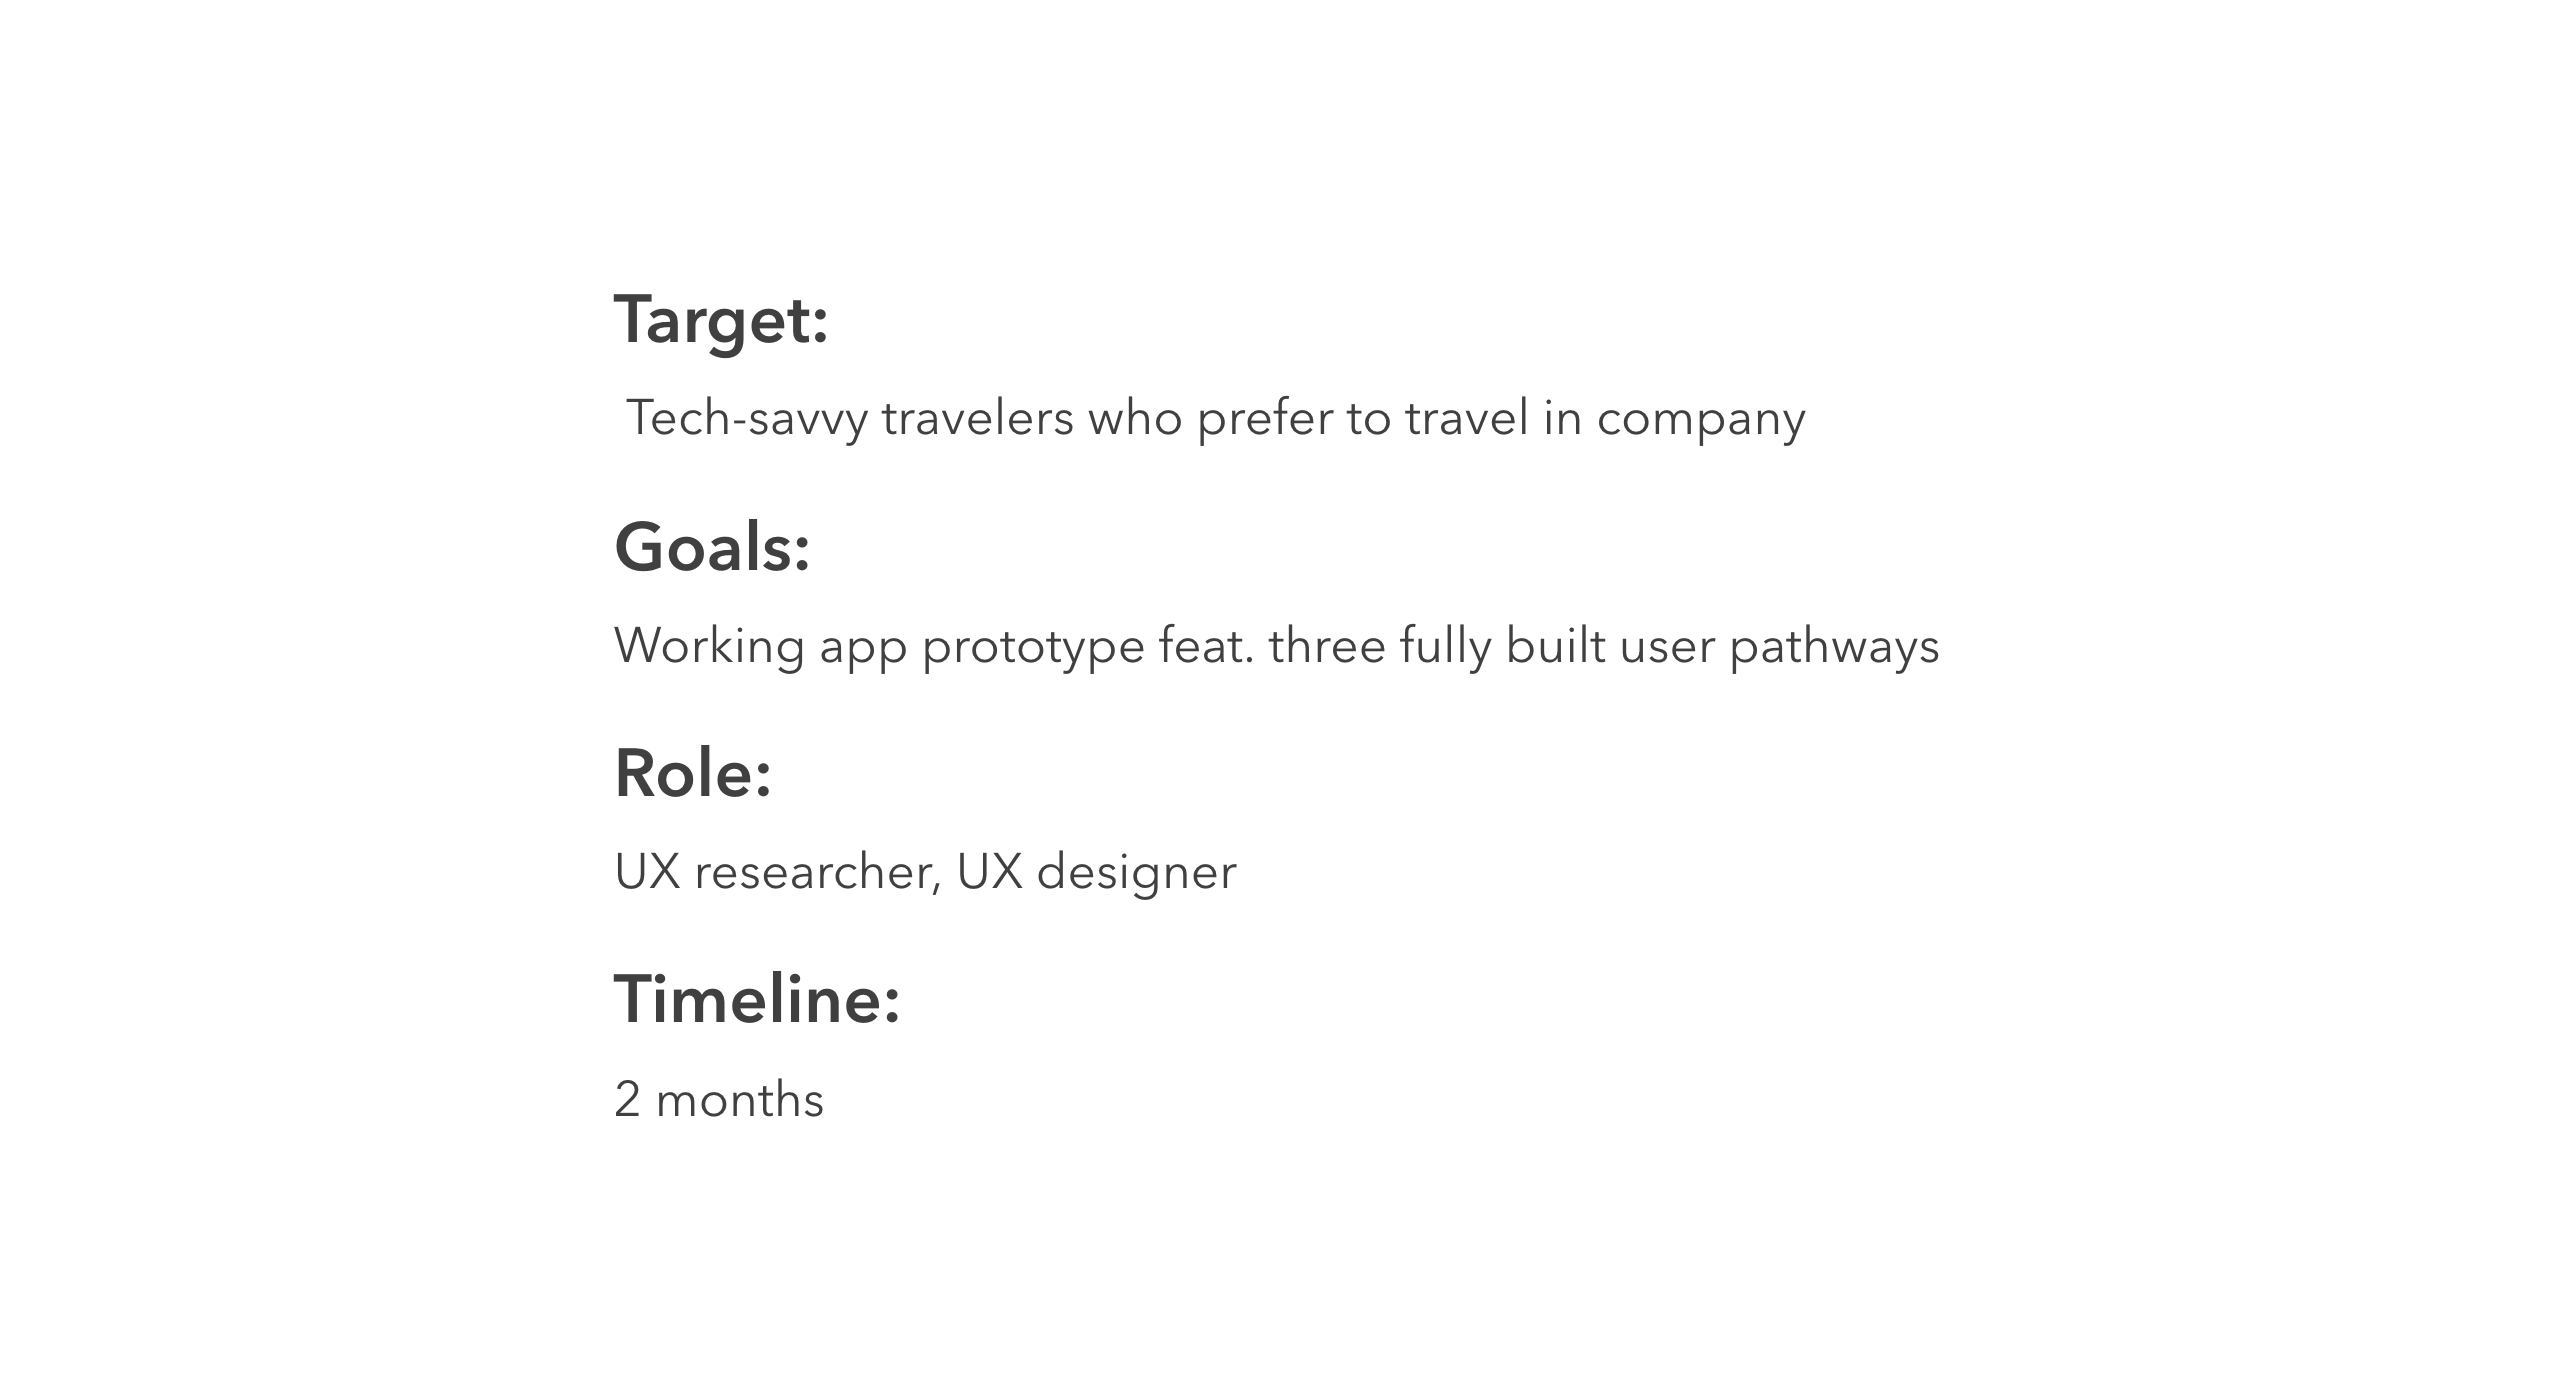 user target, timeline, my role, and project goals